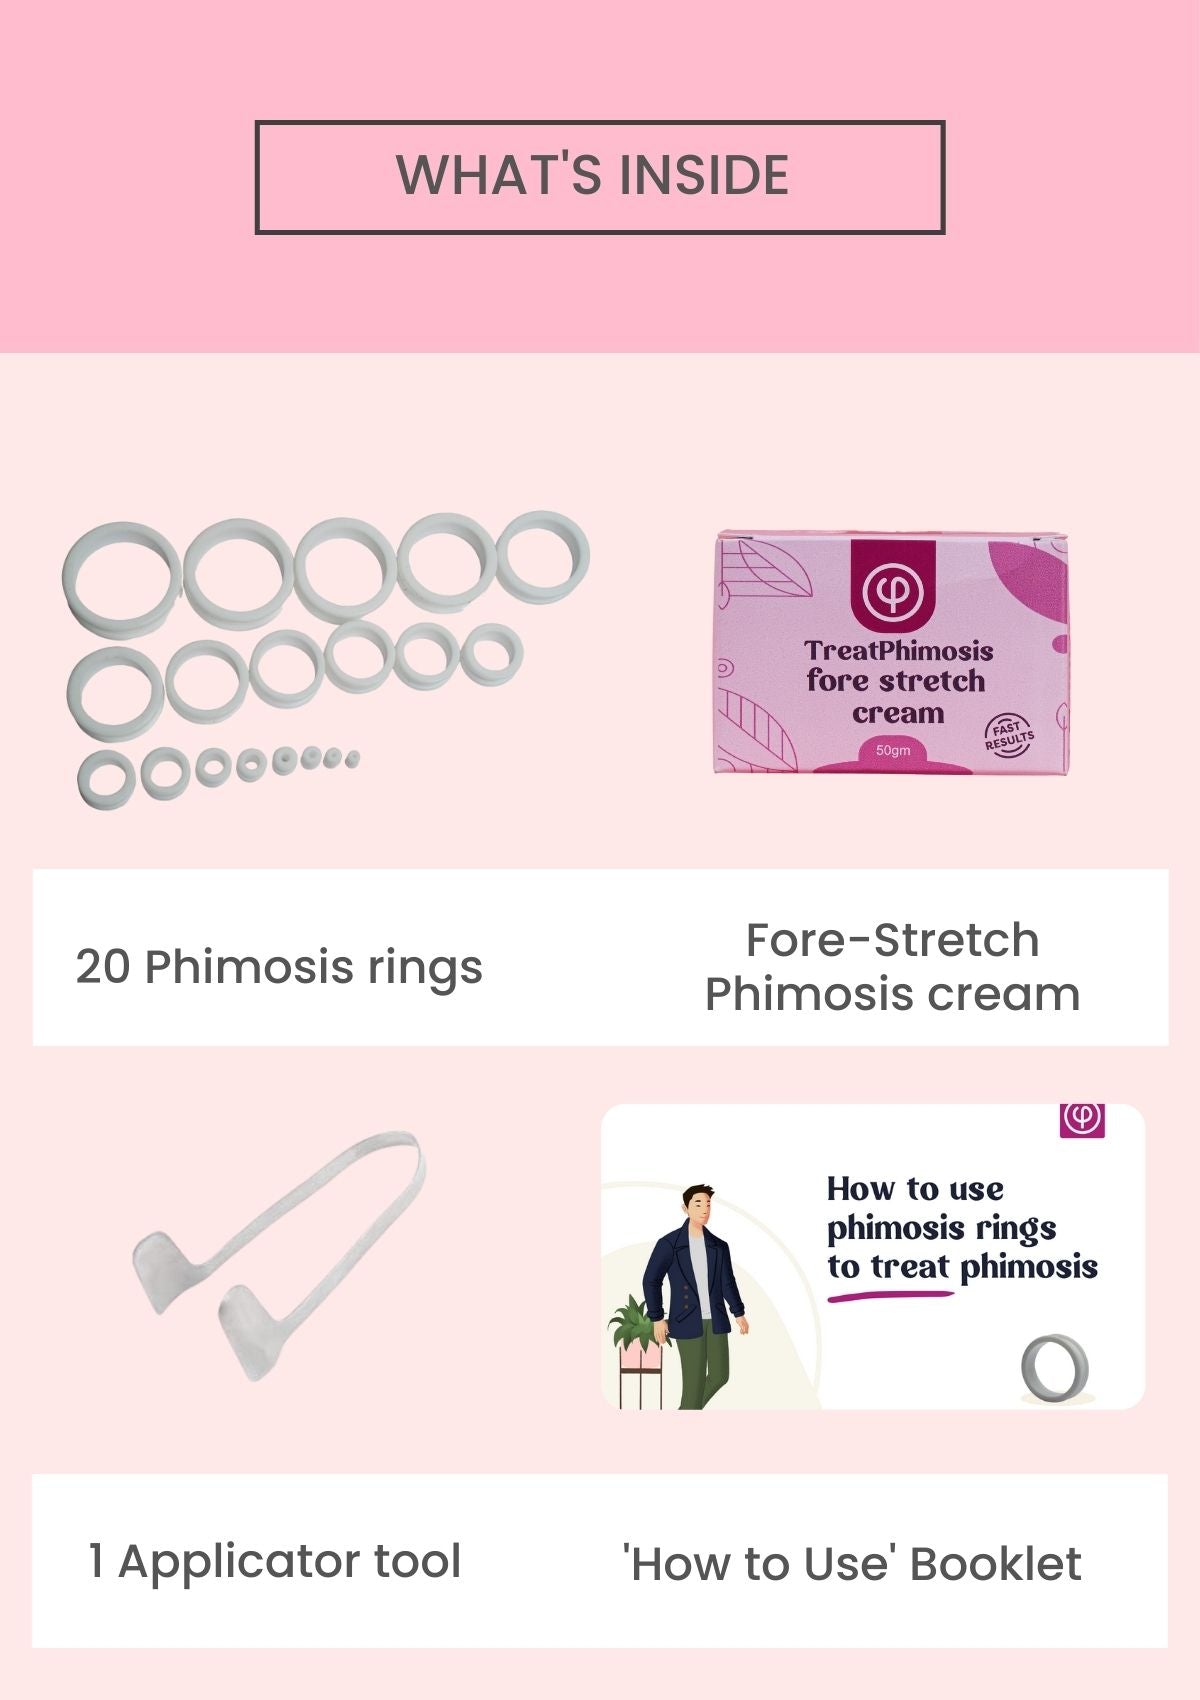 Phimosis Stretching Rings (20 Rings set) With fore-stretch phimosis cream, Applicator tool and ‘How to use’ booklet